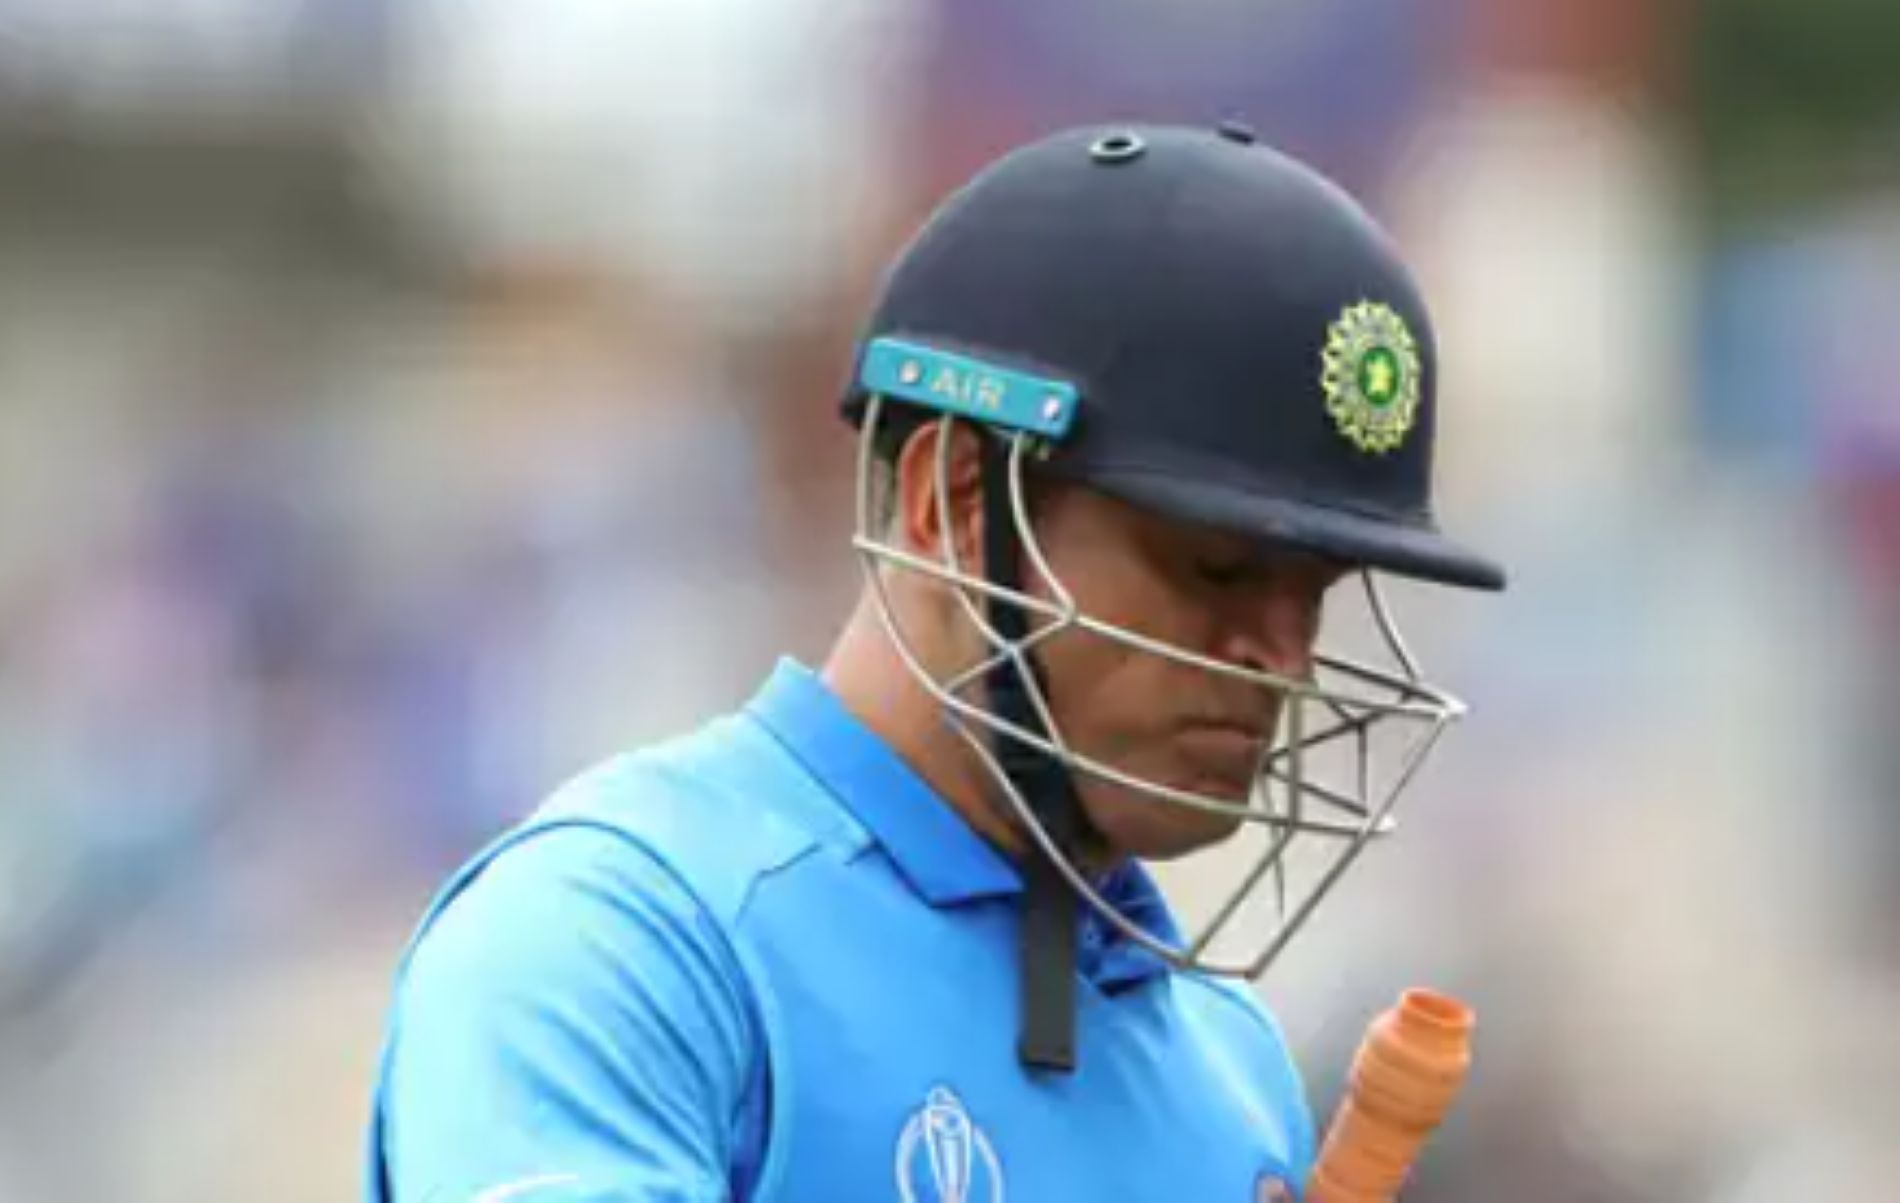 Dhoni walked into international retirement after the 2019 World Cup disappointment.